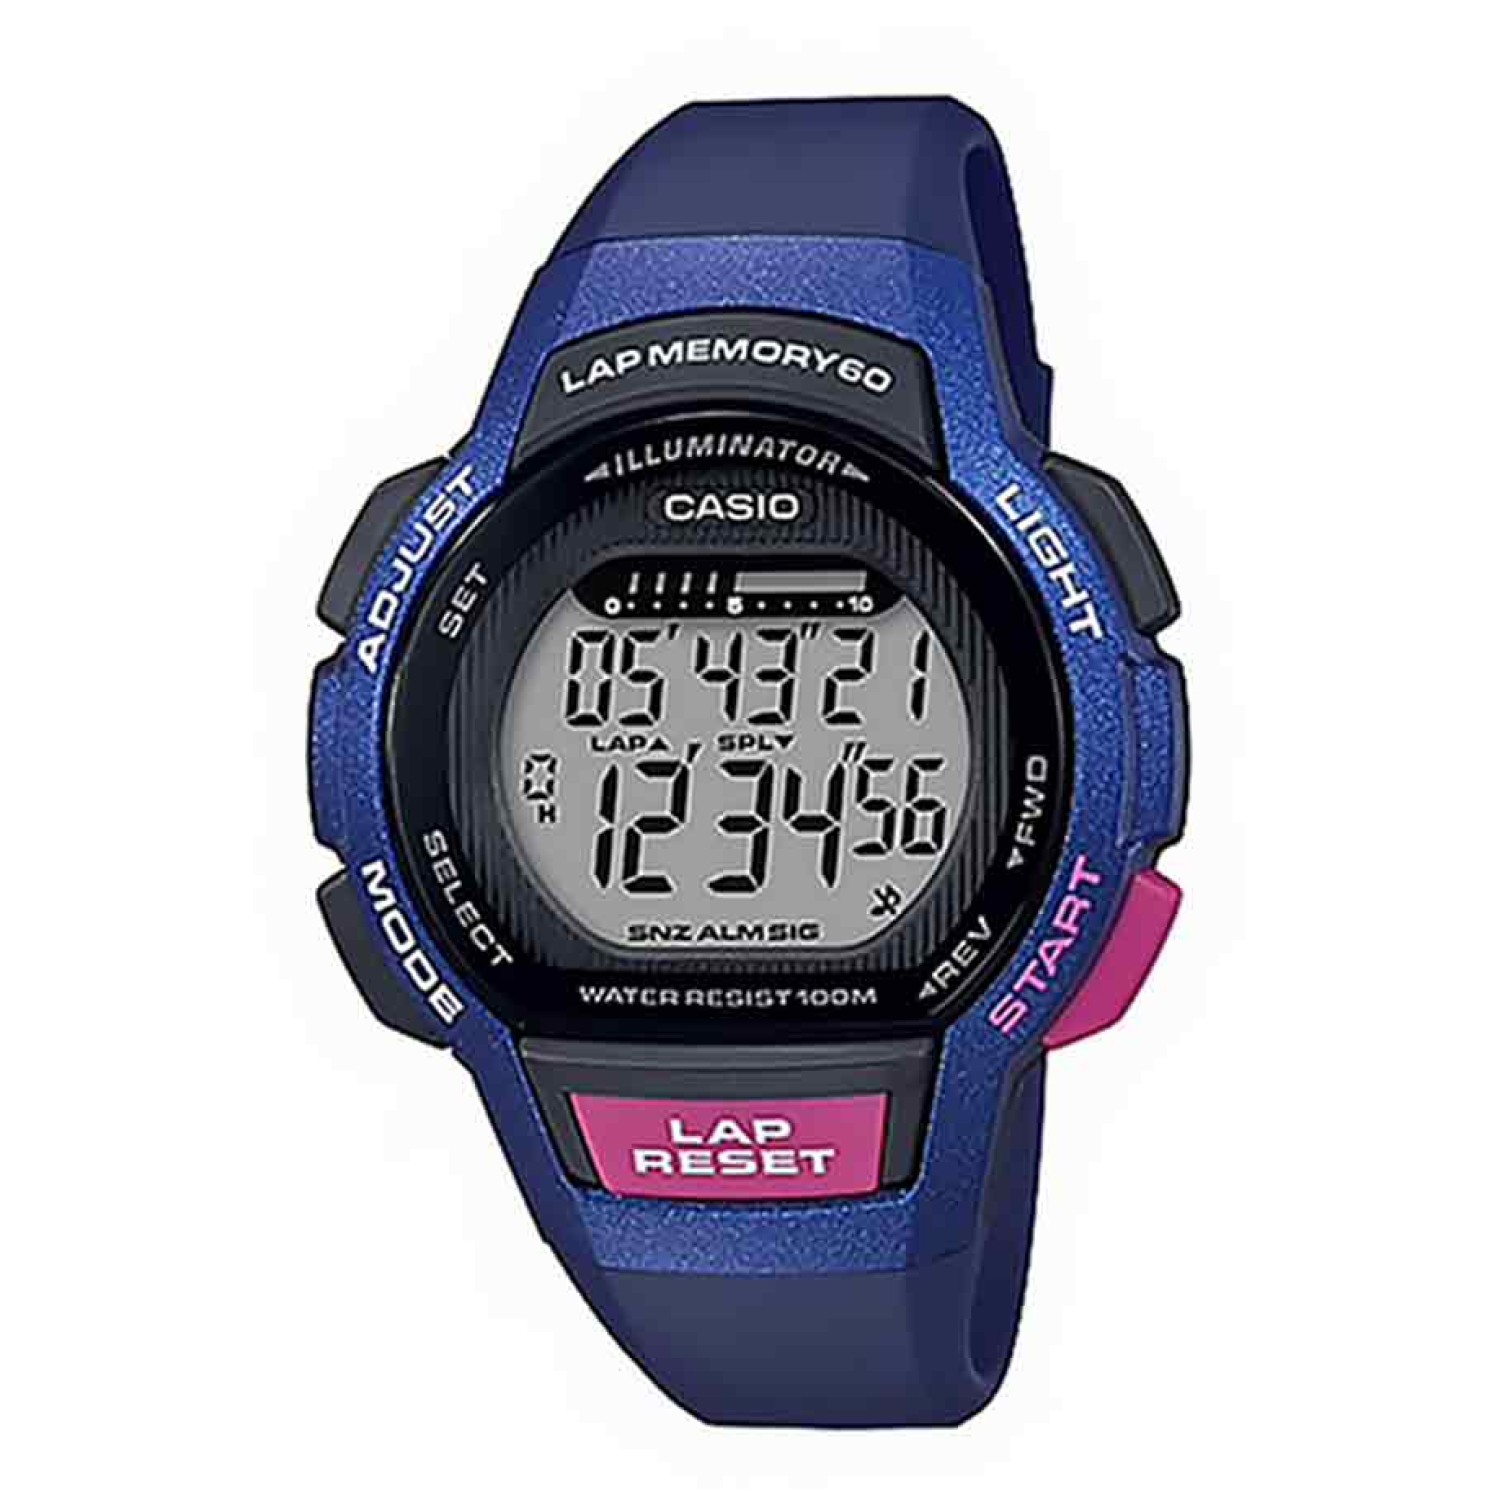 LWS1000H-2A Casio 60 Lap Memory Runners Watch. The WS-1000 series for men and the LWS-1000 series for women each come in a choice of three models. Memory is available for storage of up to 60 lap time records. During elapsed time measurement, you can displ